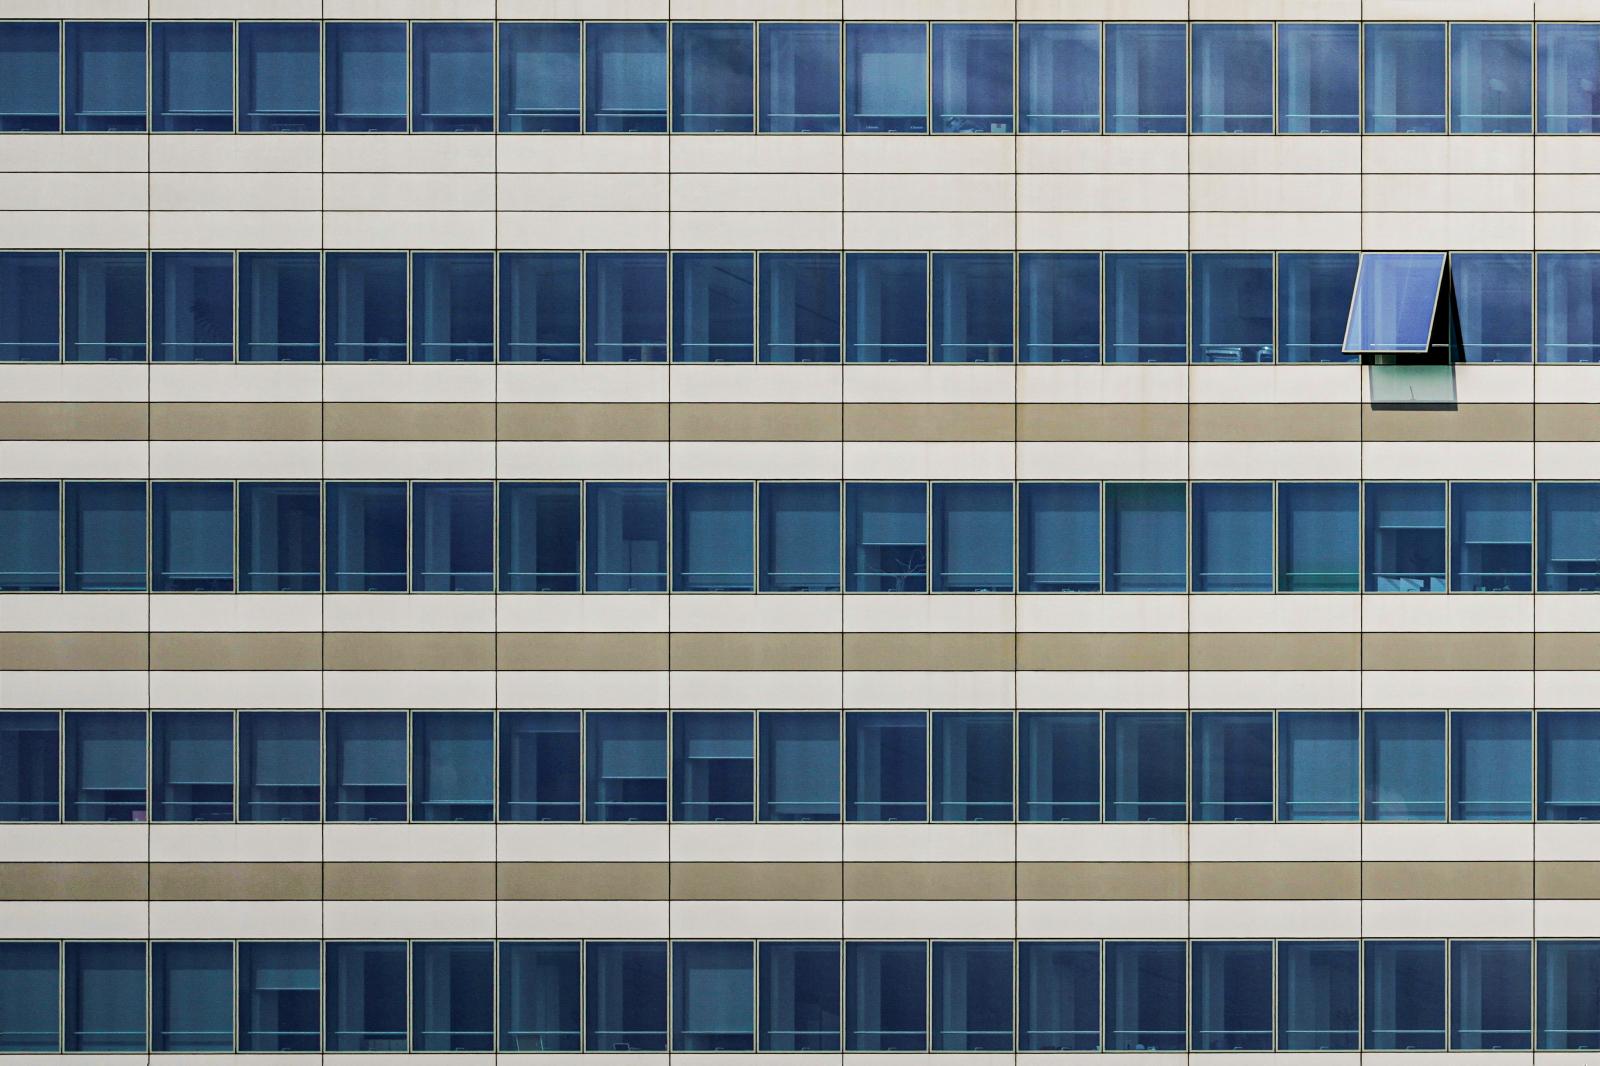 An open window in the facade of the Office building of the Insurance Company Vittoria Assicurazioni. | Buy this image